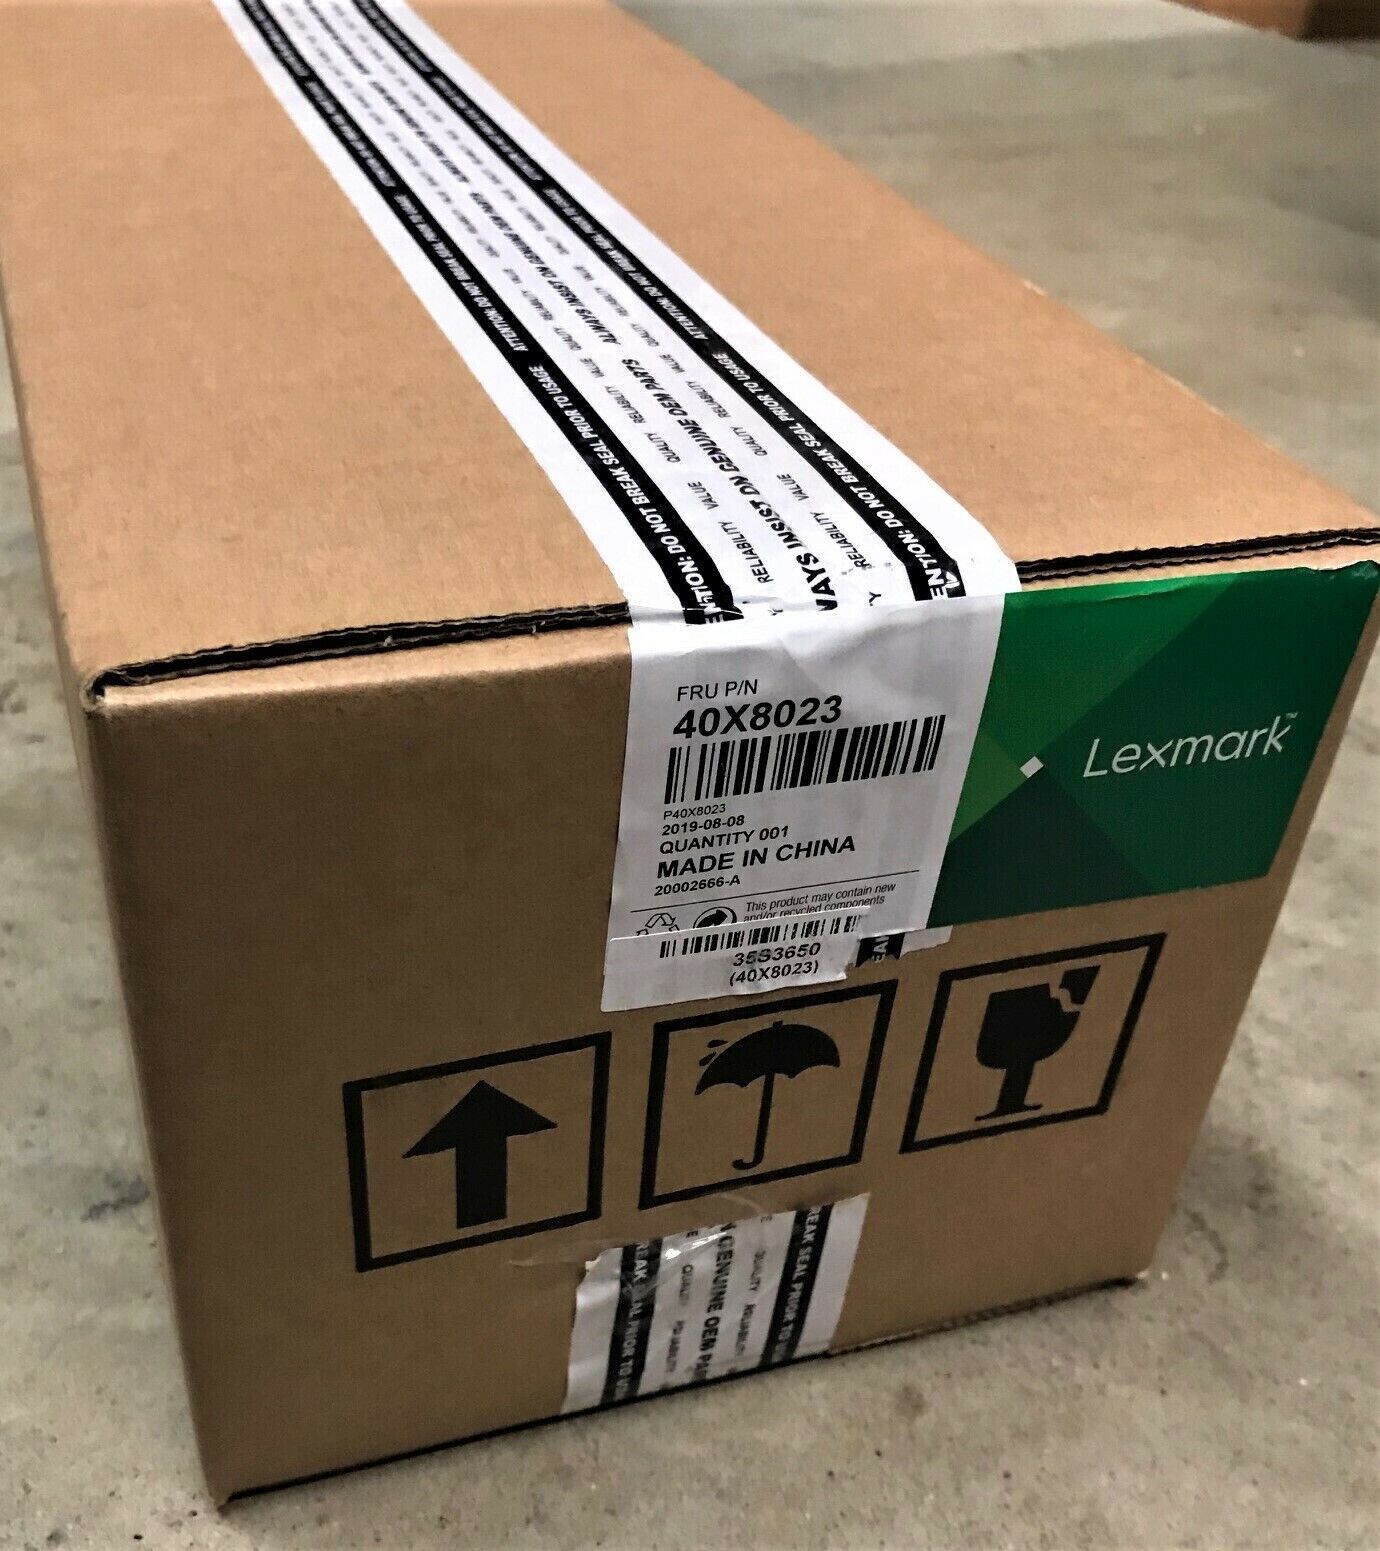 LEXMARK 40X8023 BRAND NEW IN THE BOX UNOPENED